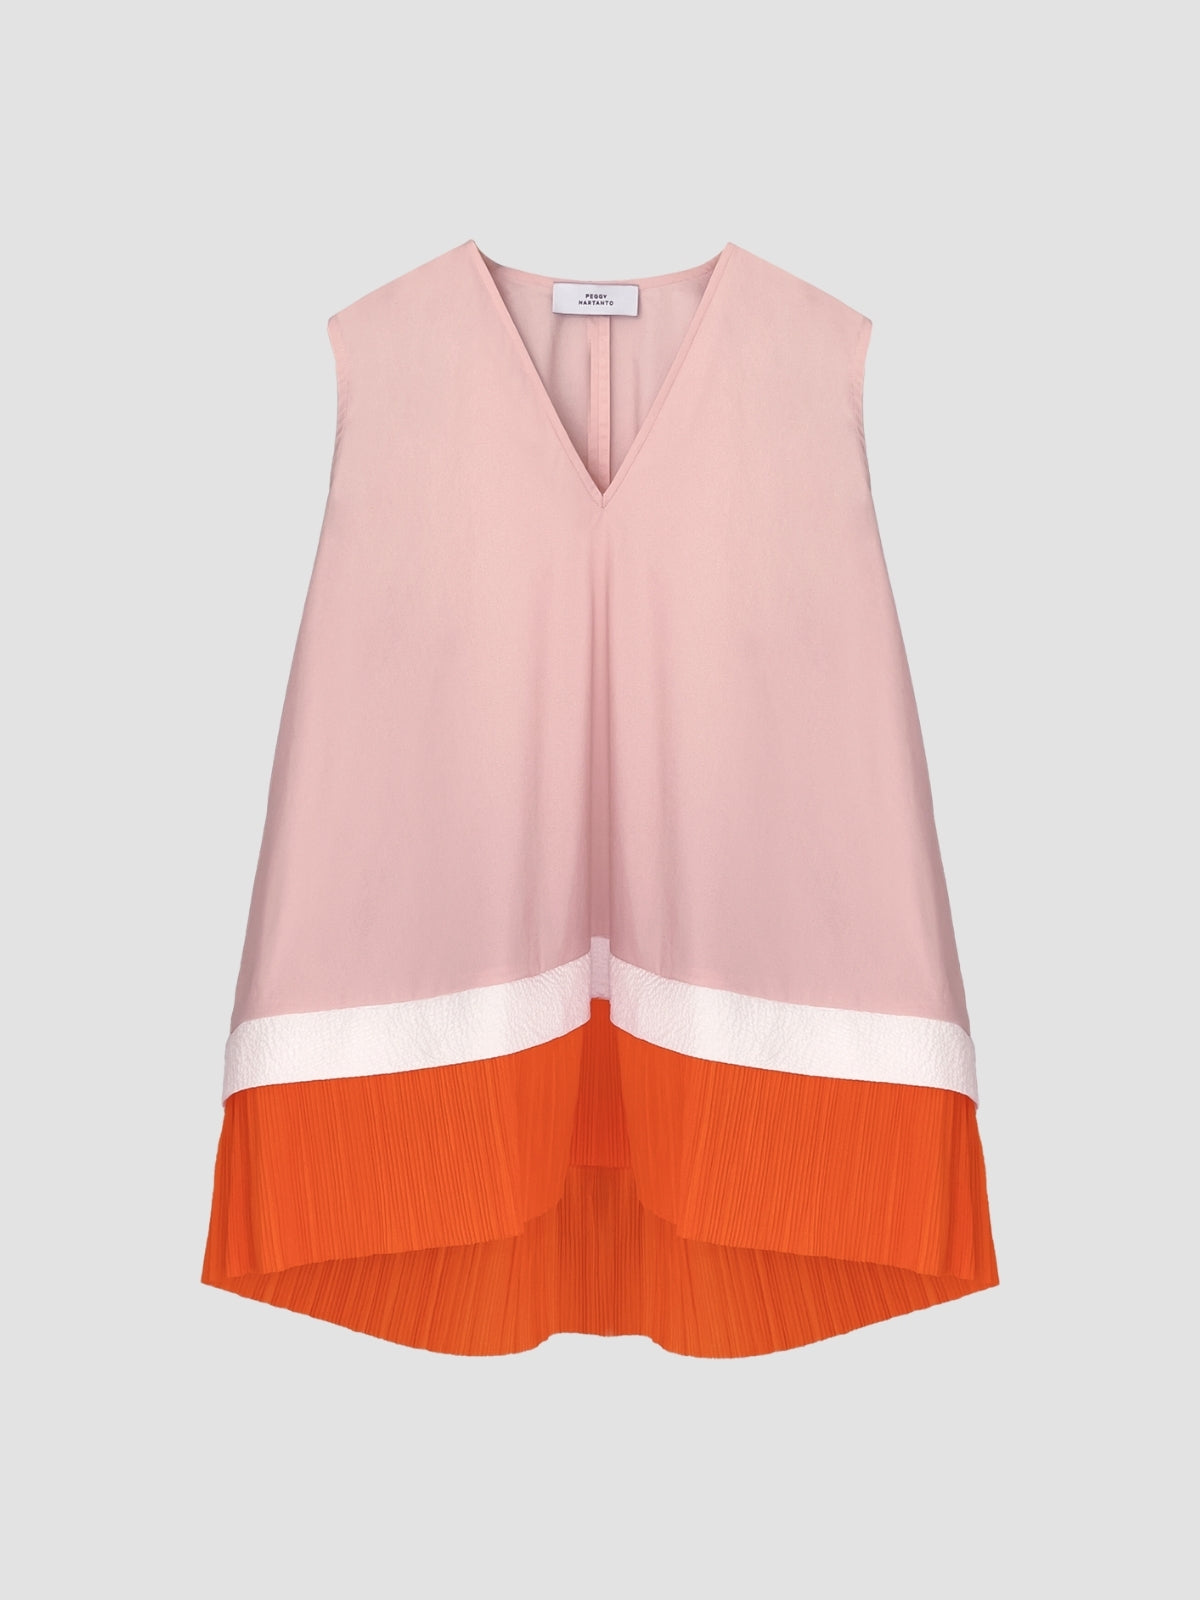 Coral pink Mikoshi blouse with orange pleats